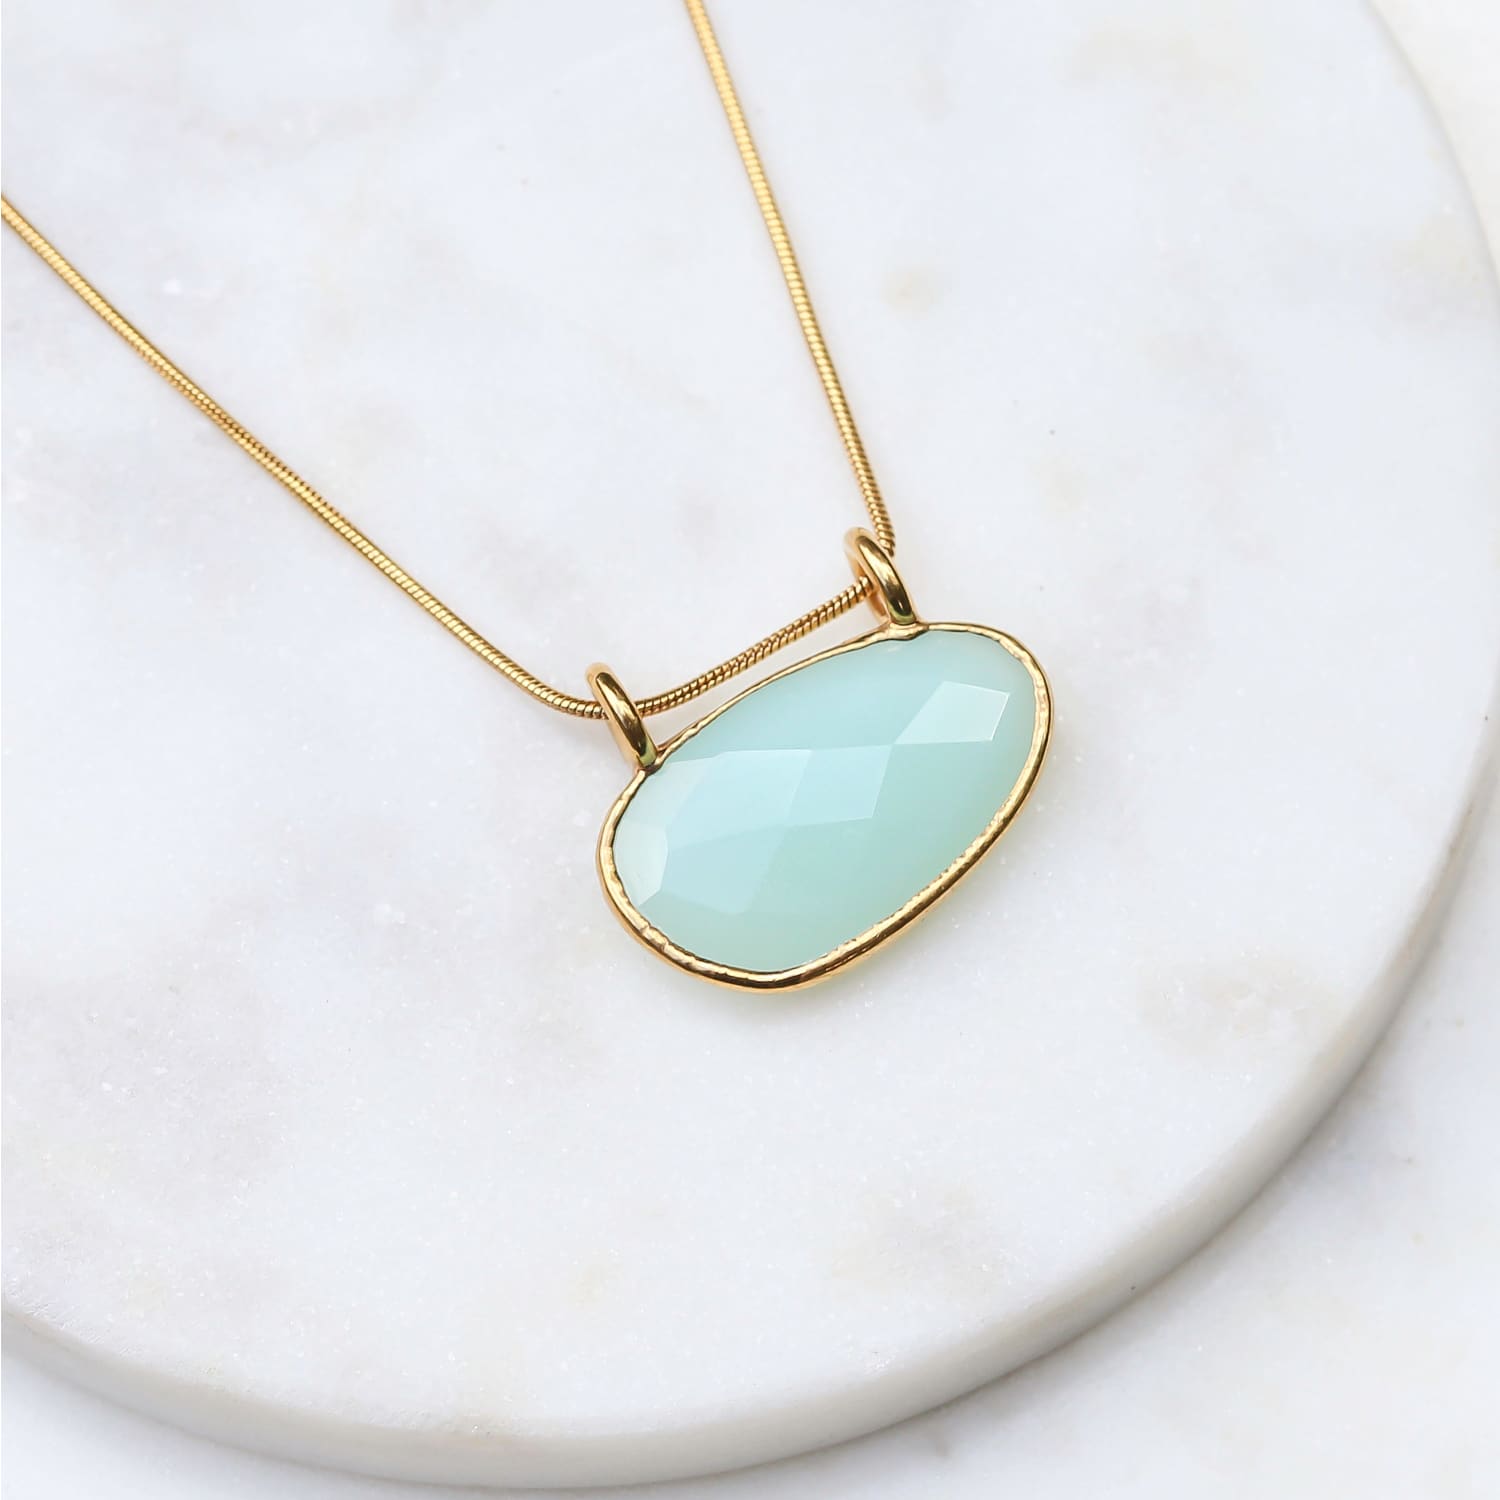 Blue Chalcedony Pendant Necklace in Rosecut Raw Gemstone